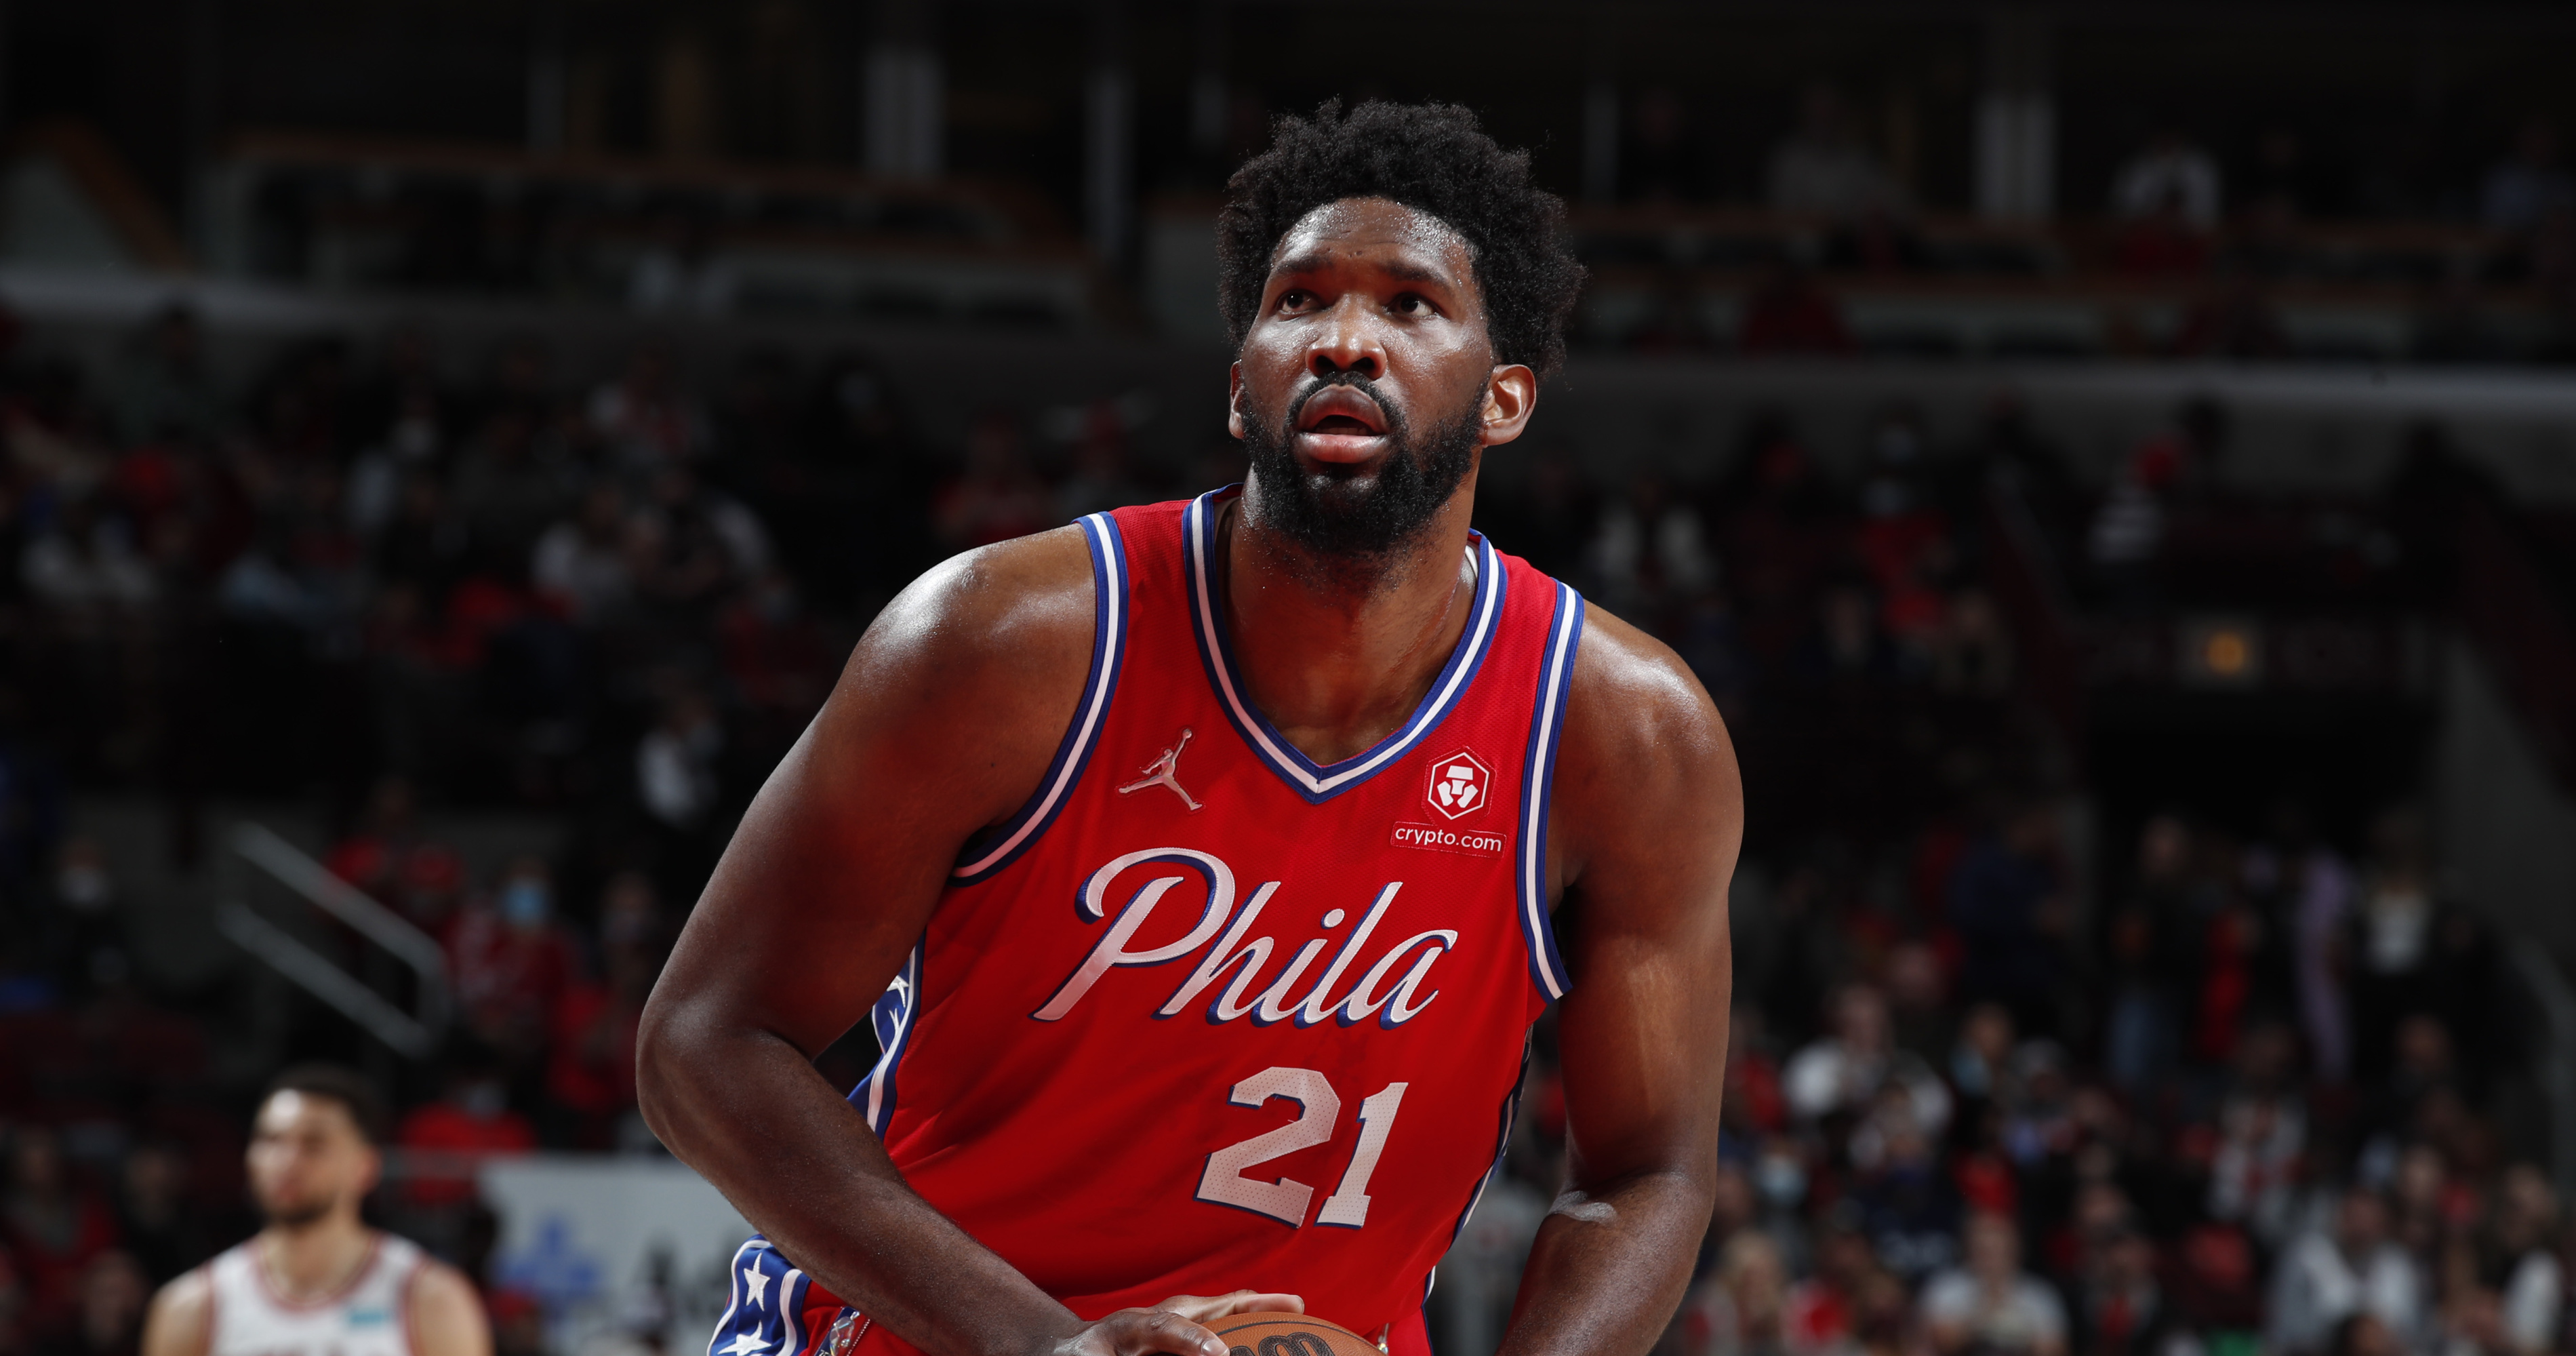 Woj 76ers' Joel Embiid Could Return from COVID19 as Early as Saturday